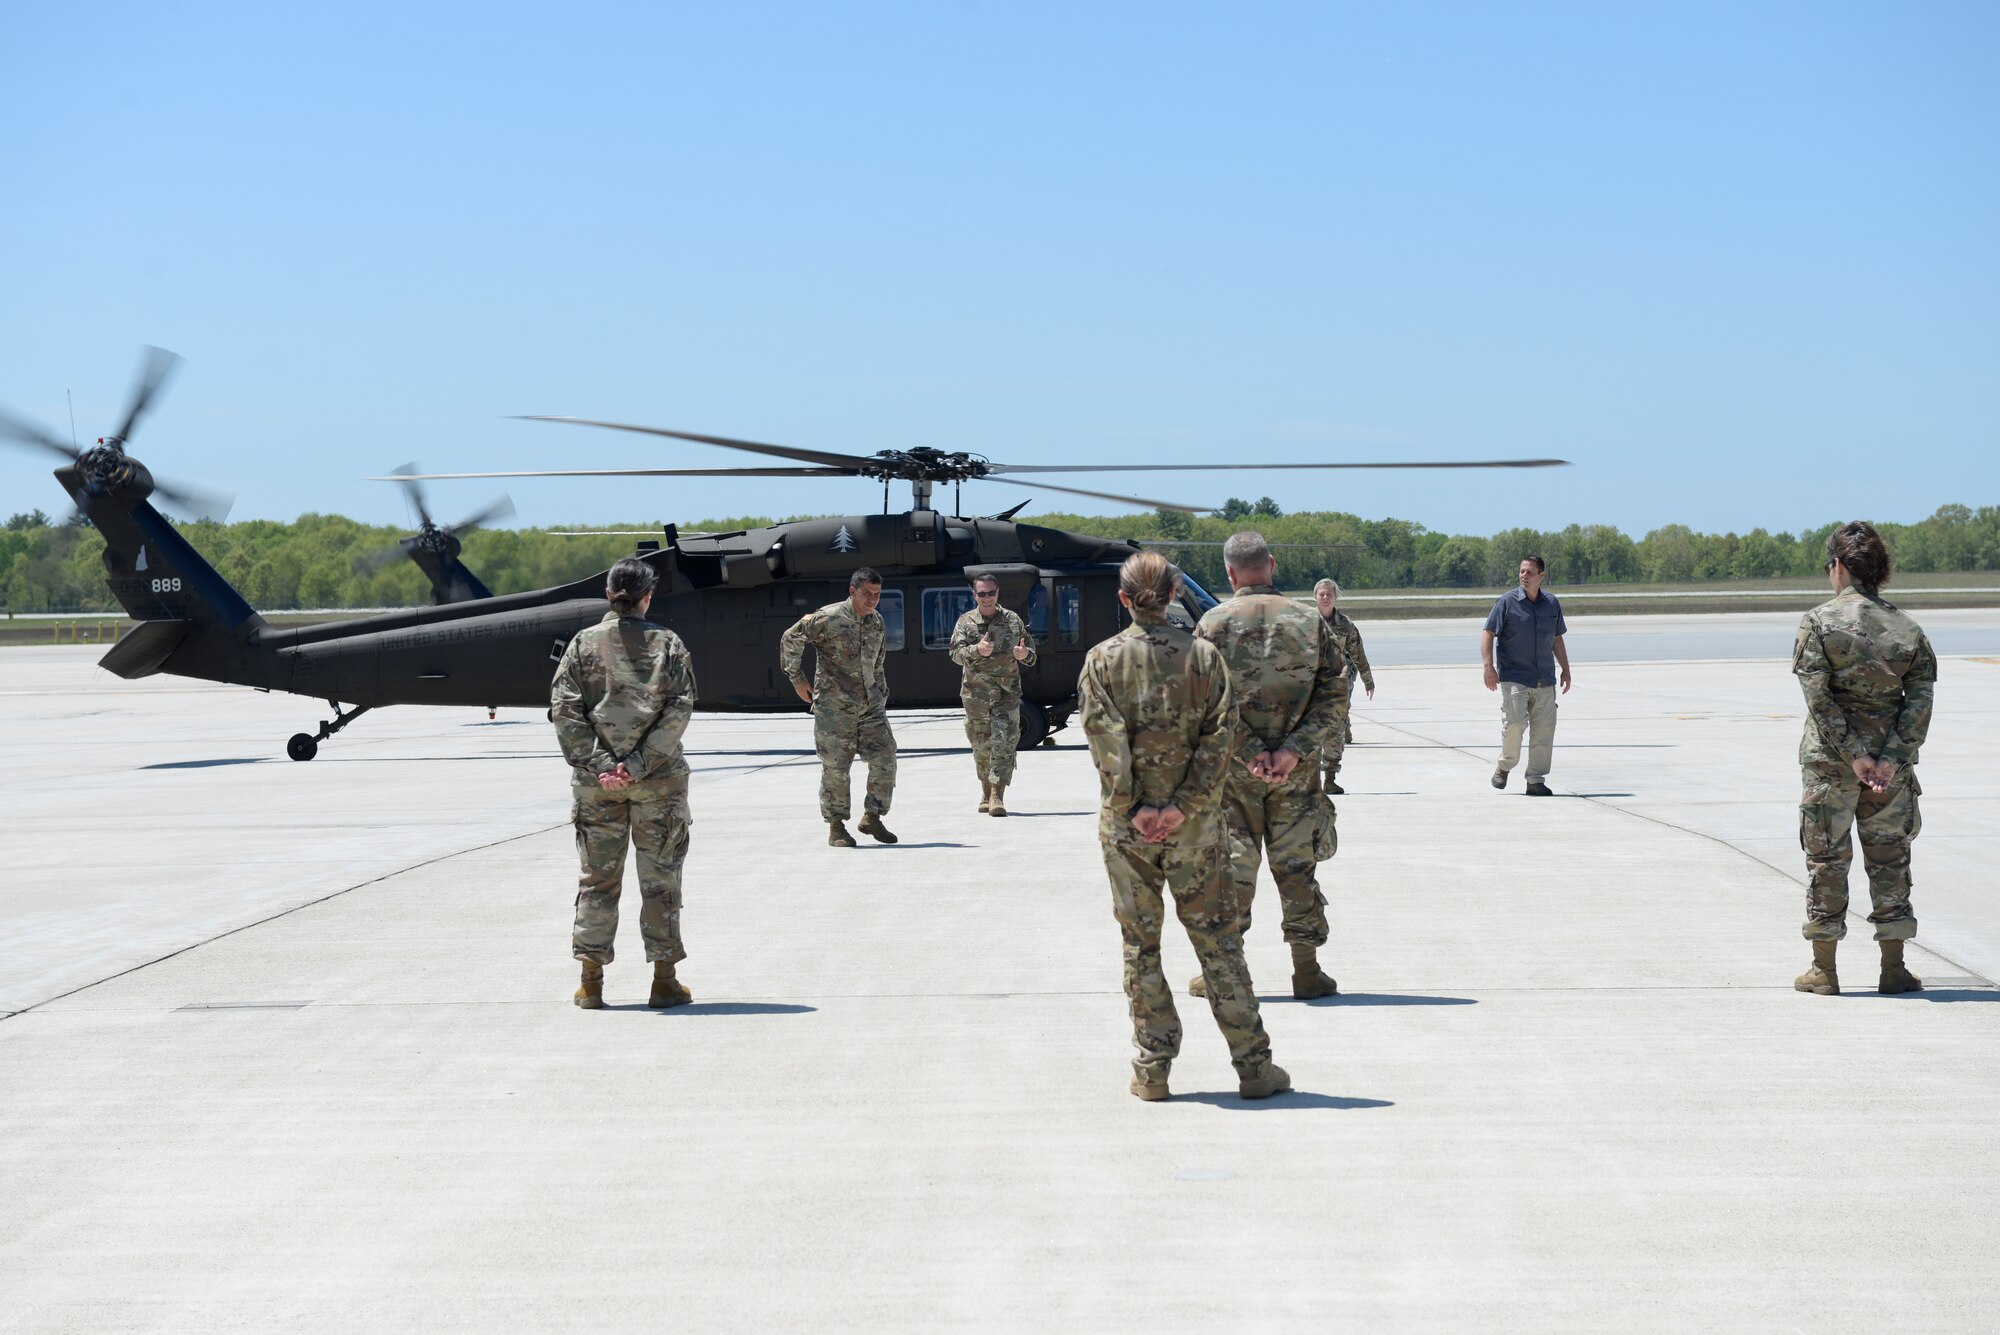 Gen. Joseph L. Lengyel, the Chief of the National Guard Bureau, gives the thumbs up sign as he disembarks an HH60M Black Hawk at Pease Air National Guard Base, Newington, N.H., after a flight to Concord to learn about the NHNG's involvment in the state's response to the COVID-19 pandemic, May 27, 2020. Lengyel arrived at Pease earlier that day and toured a KC-46A Pegasus. (U.S. Air National Guard photo by Senior Master Sgt. Timm Huffman)